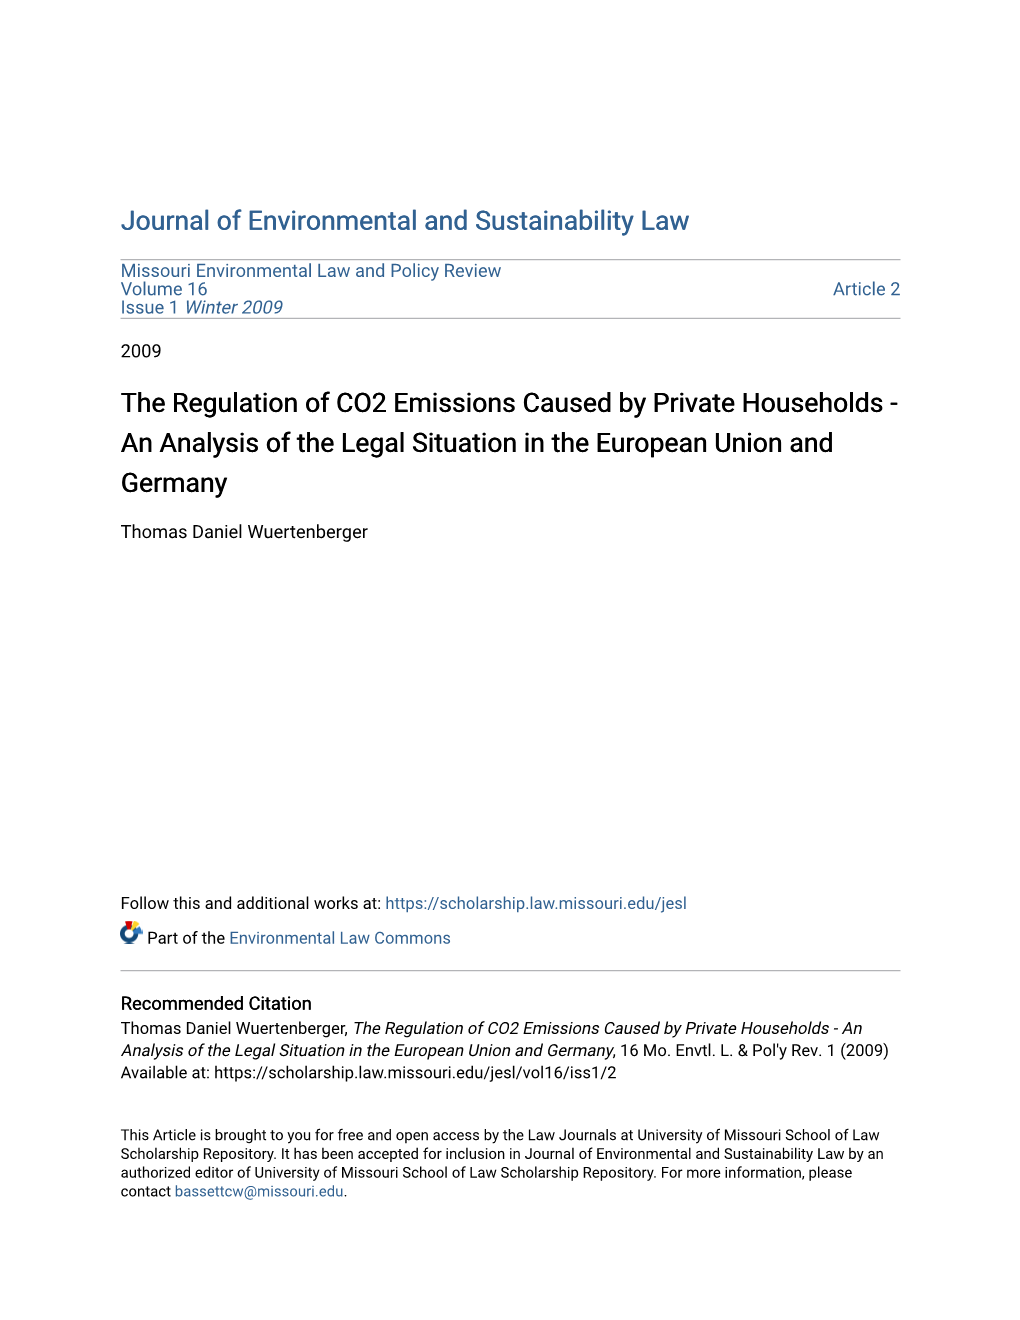 The Regulation of CO2 Emissions Caused by Private Households - an Analysis of the Legal Situation in the European Union and Germany